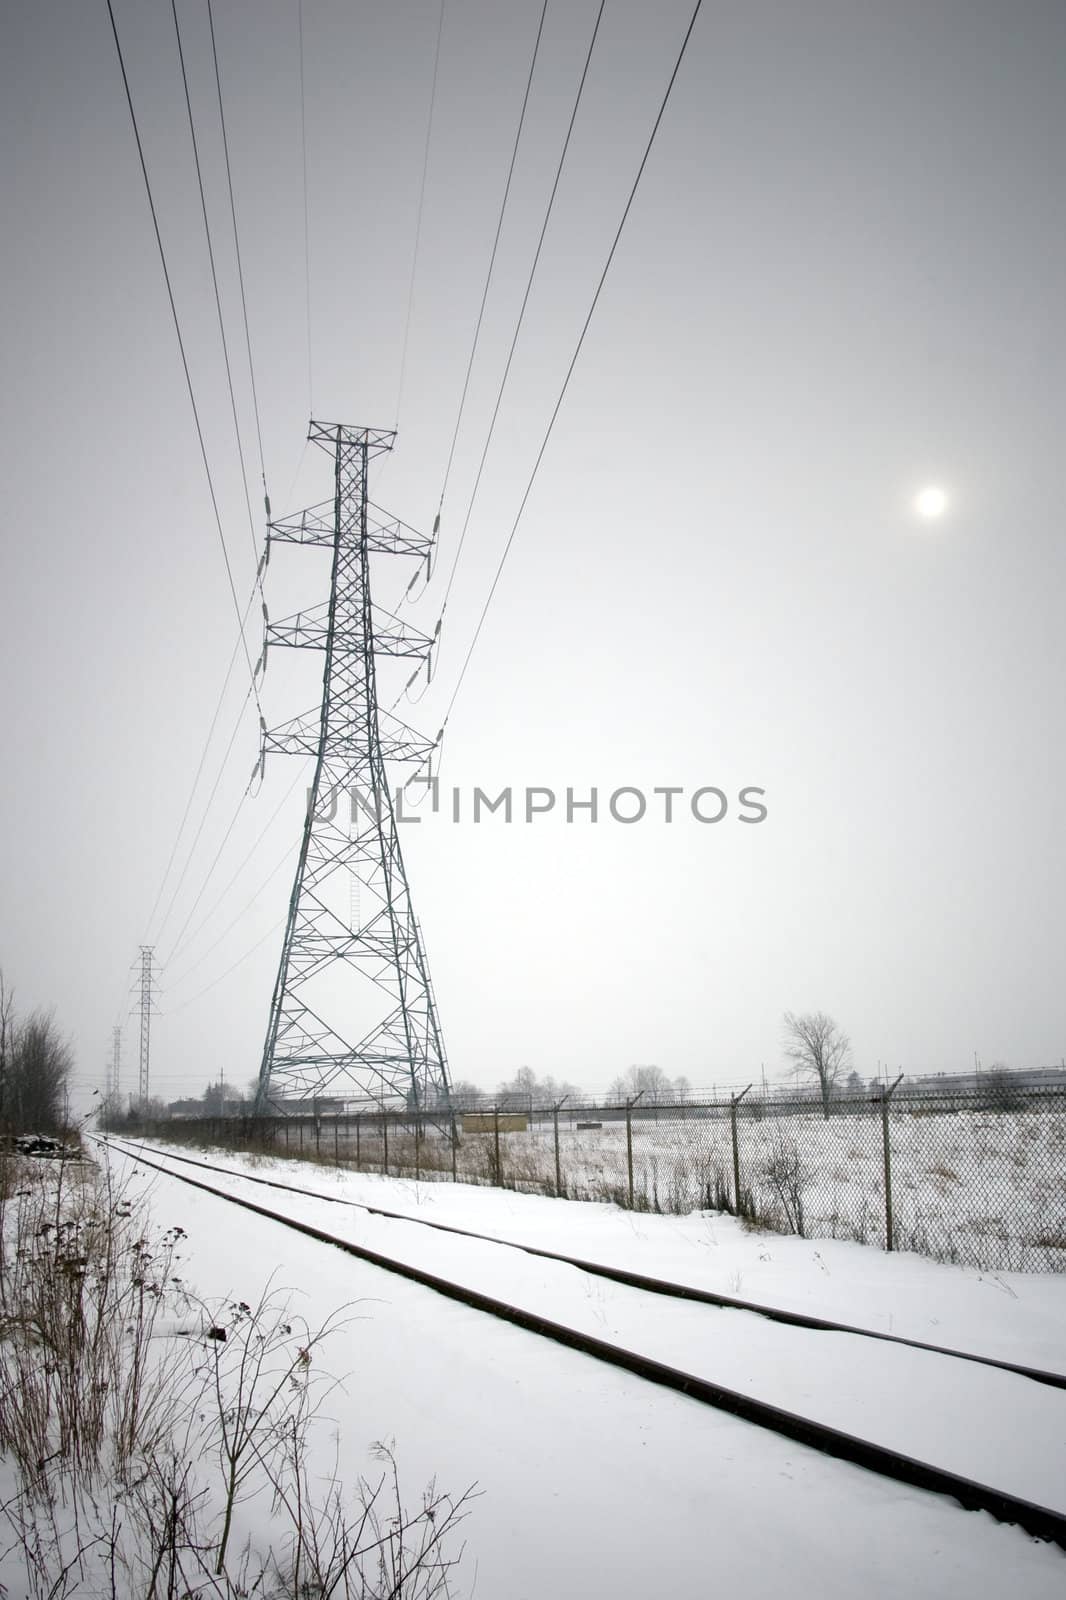 Hydro lines along train tracks in winter by woodygraphs